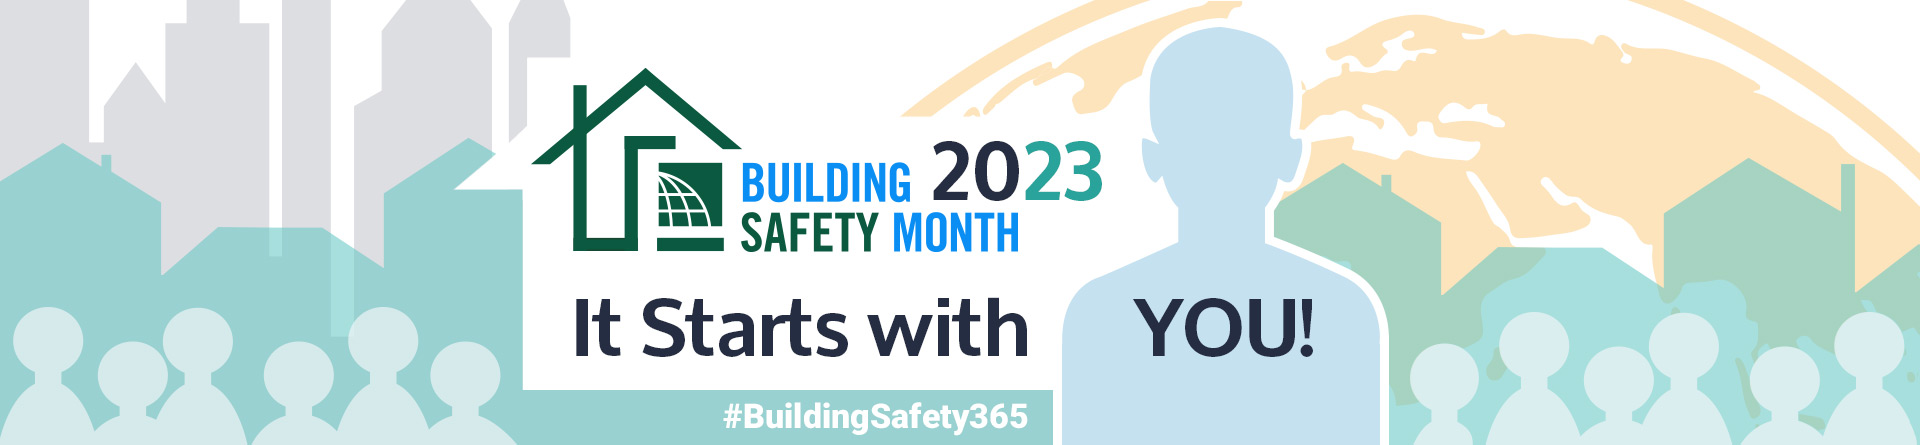 Protected: 2023 Building Safety Month Proclamations